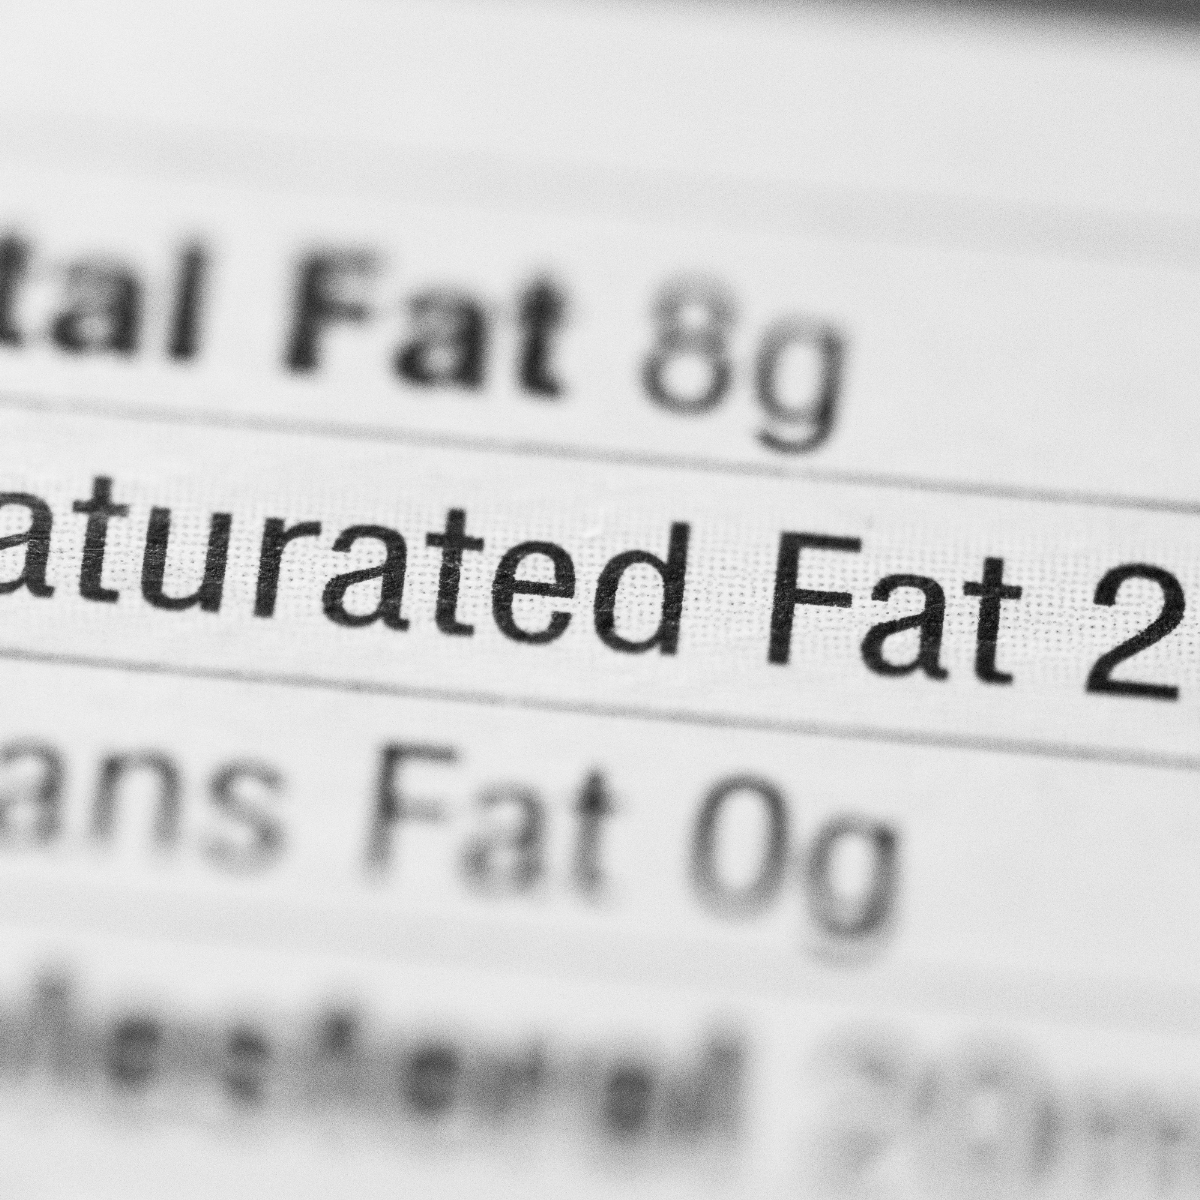 What is saturated fat